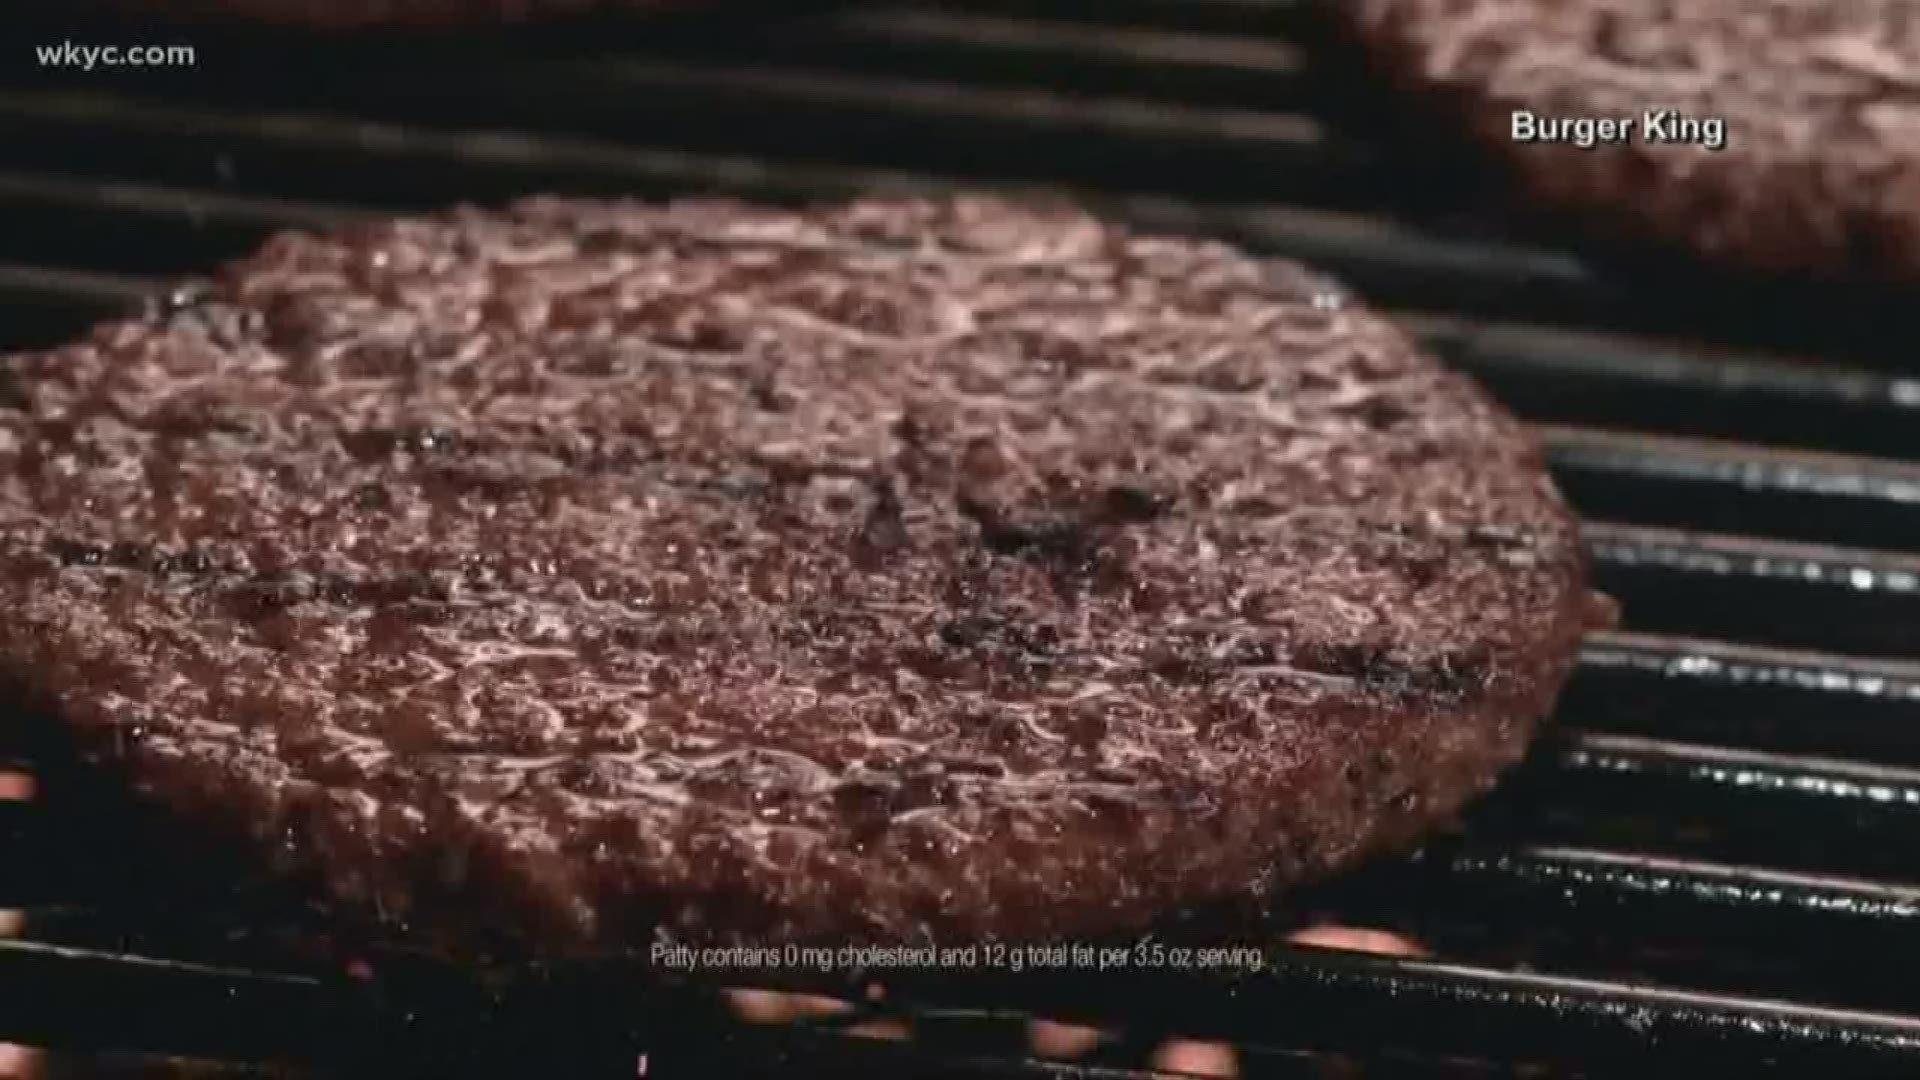 The lawsuit alleges that the vegan burgers are cooked on the same grill as meat ones. Those suing  say it contaminates the vegan ones with meat byproduct.